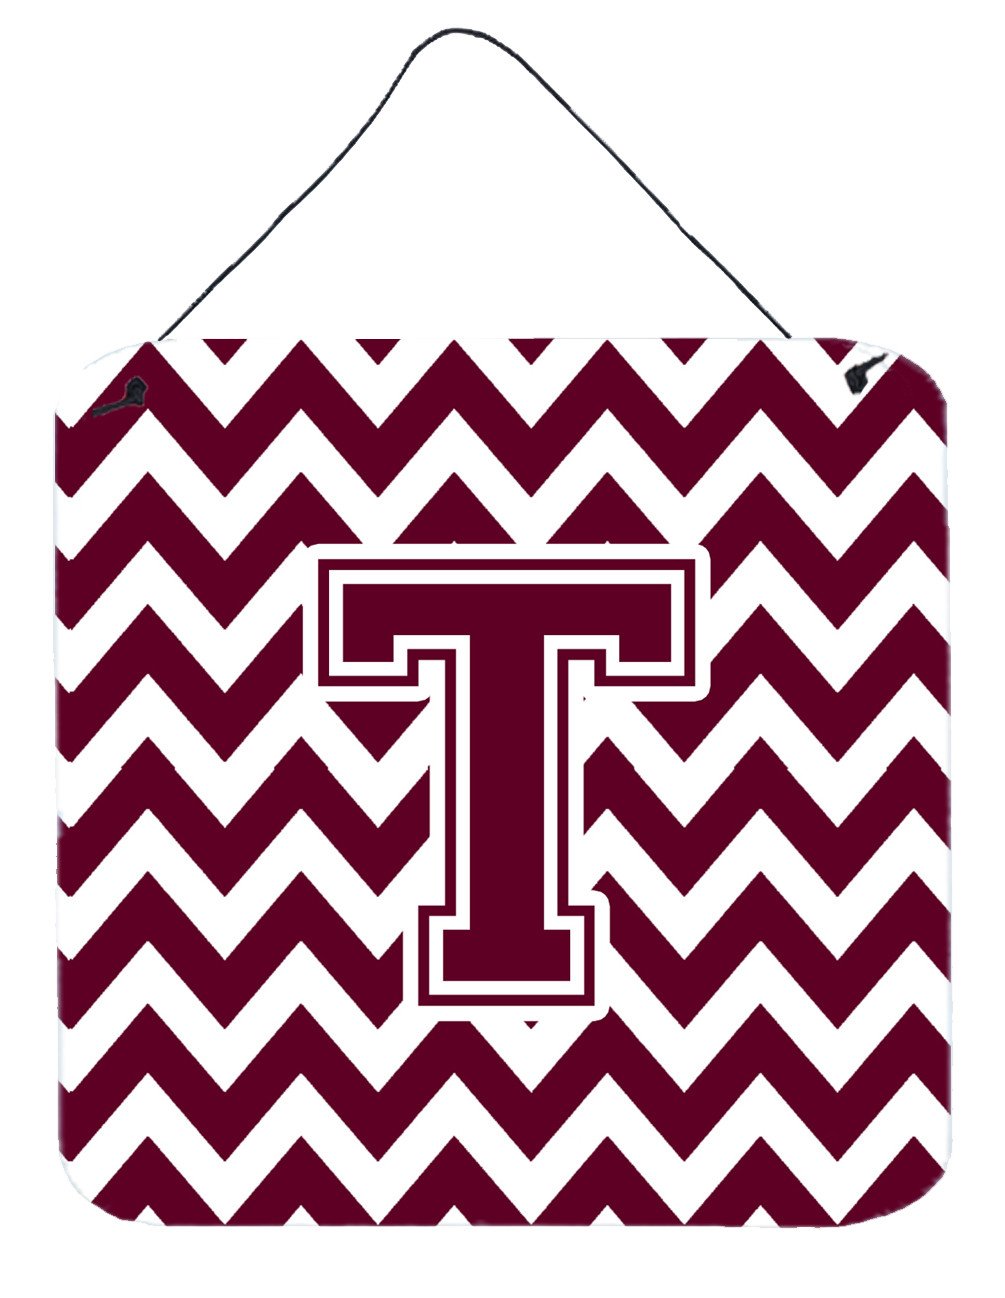 Letter T Chevron Maroon and White  Wall or Door Hanging Prints CJ1051-TDS66 by Caroline's Treasures